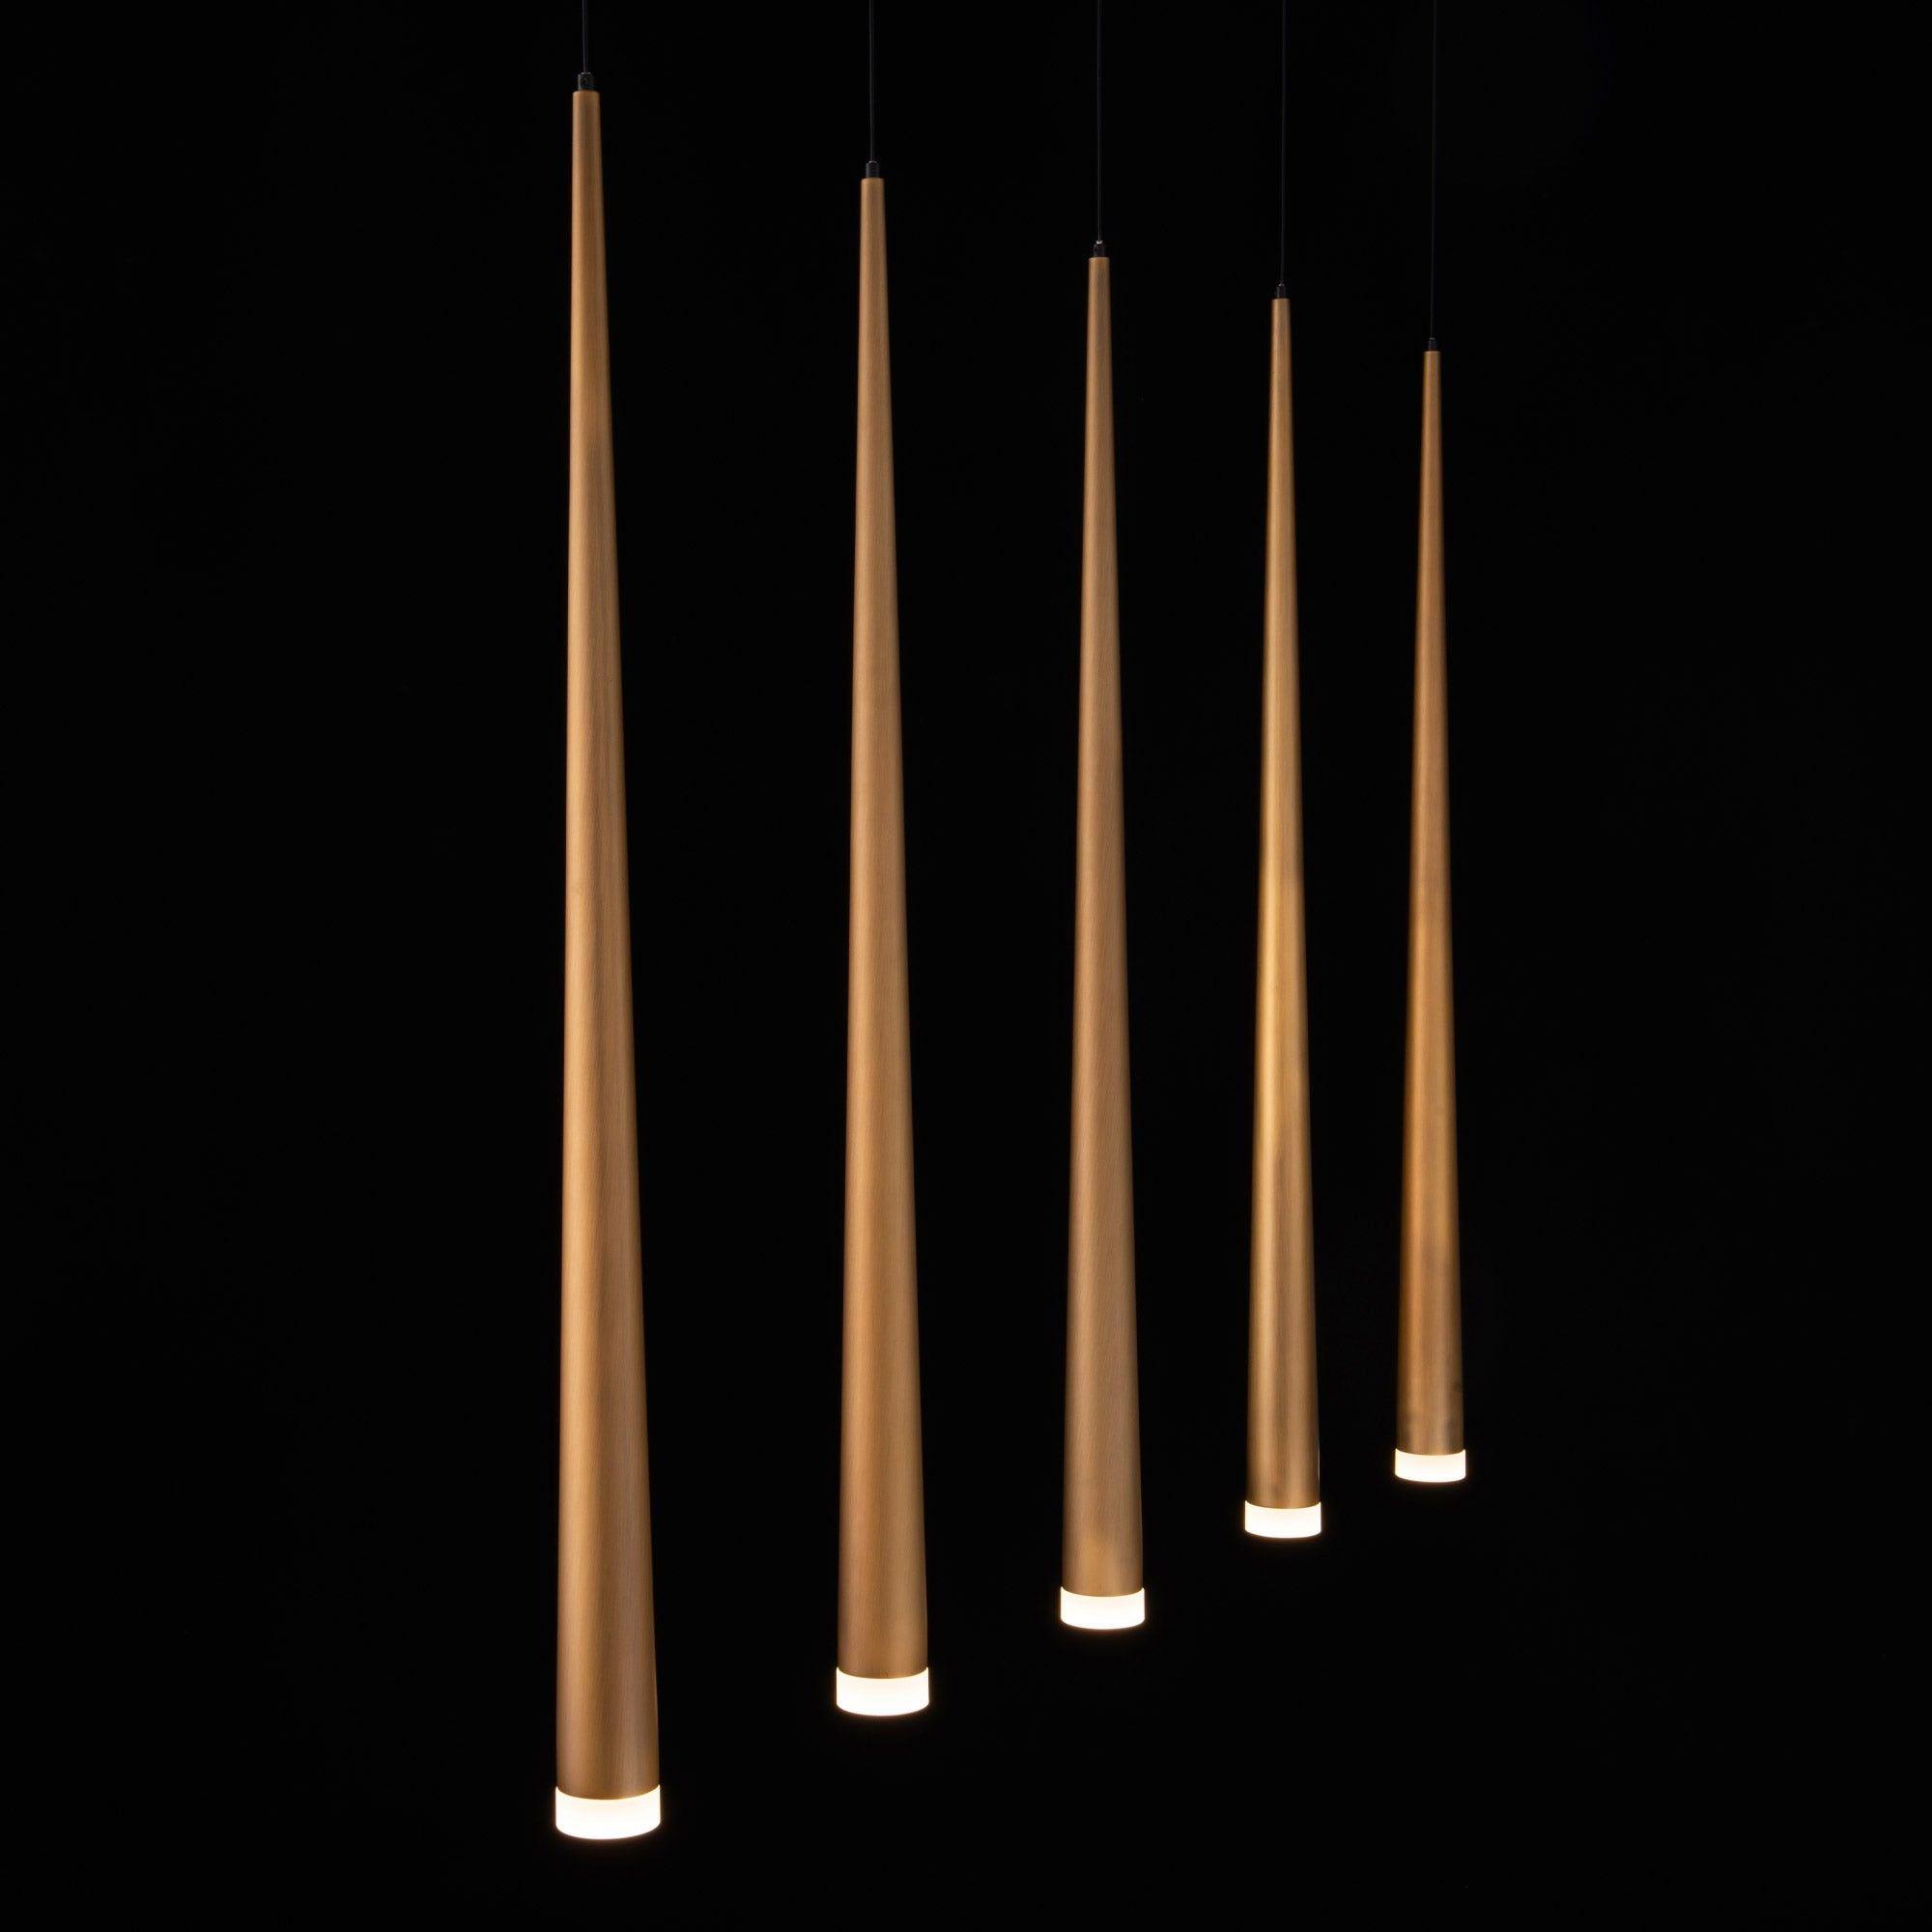 Modern Forms - Cascade LED 5 Light Etched Glass Linear Chandelier - Lights Canada